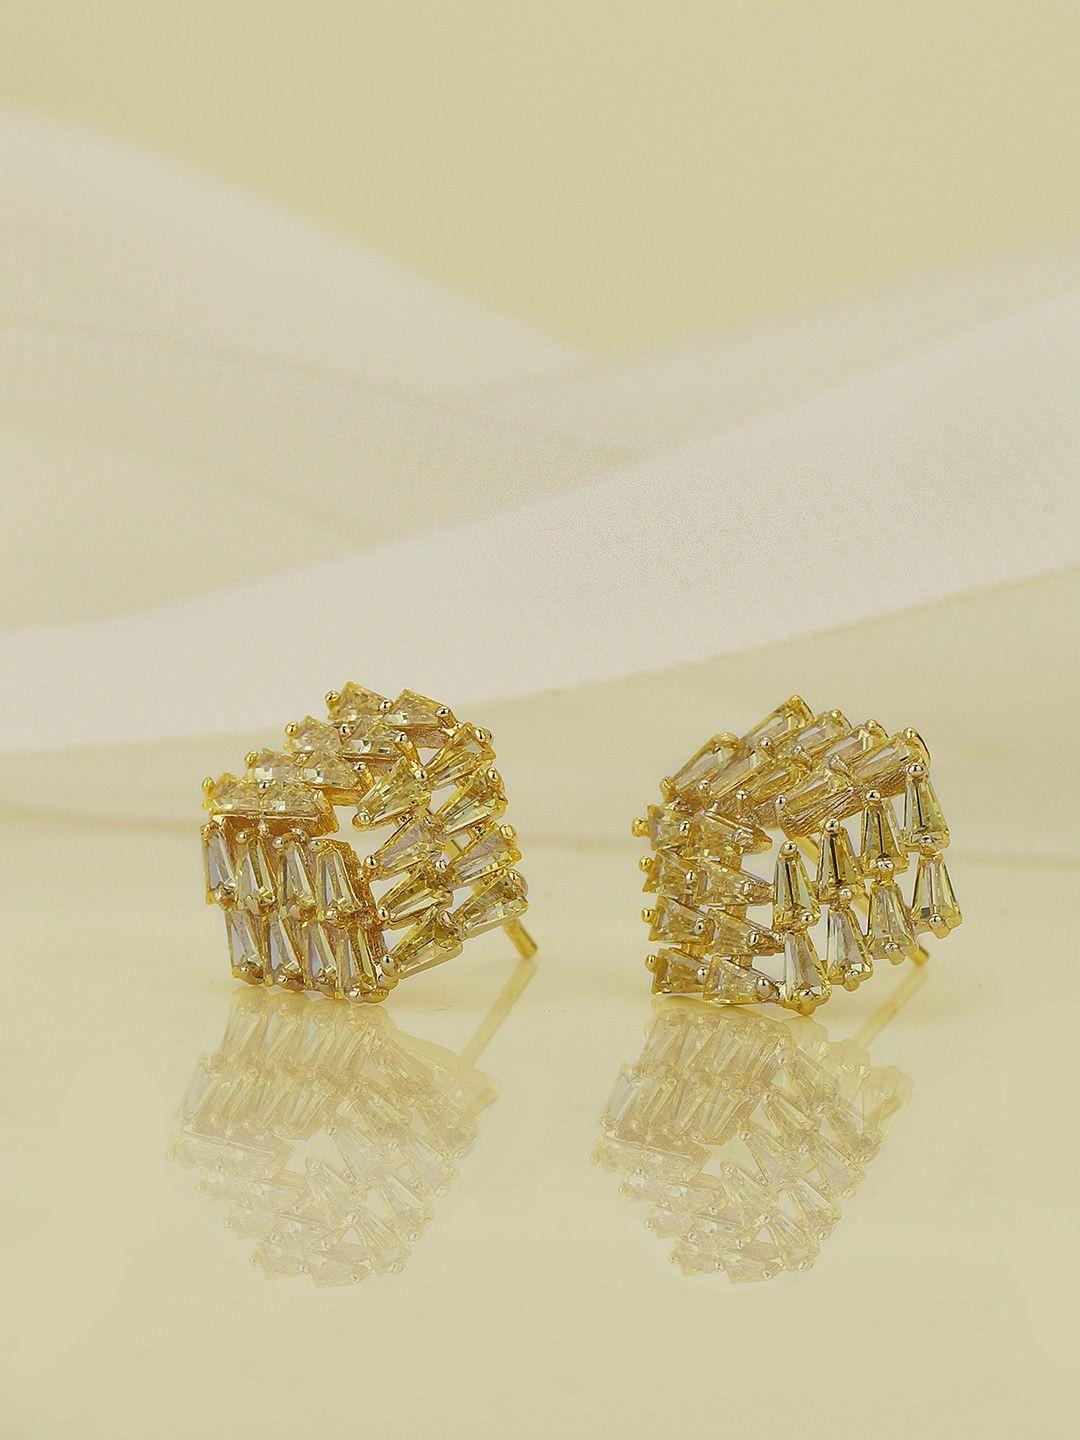 carlton london gold-plated contemporary studs earrings